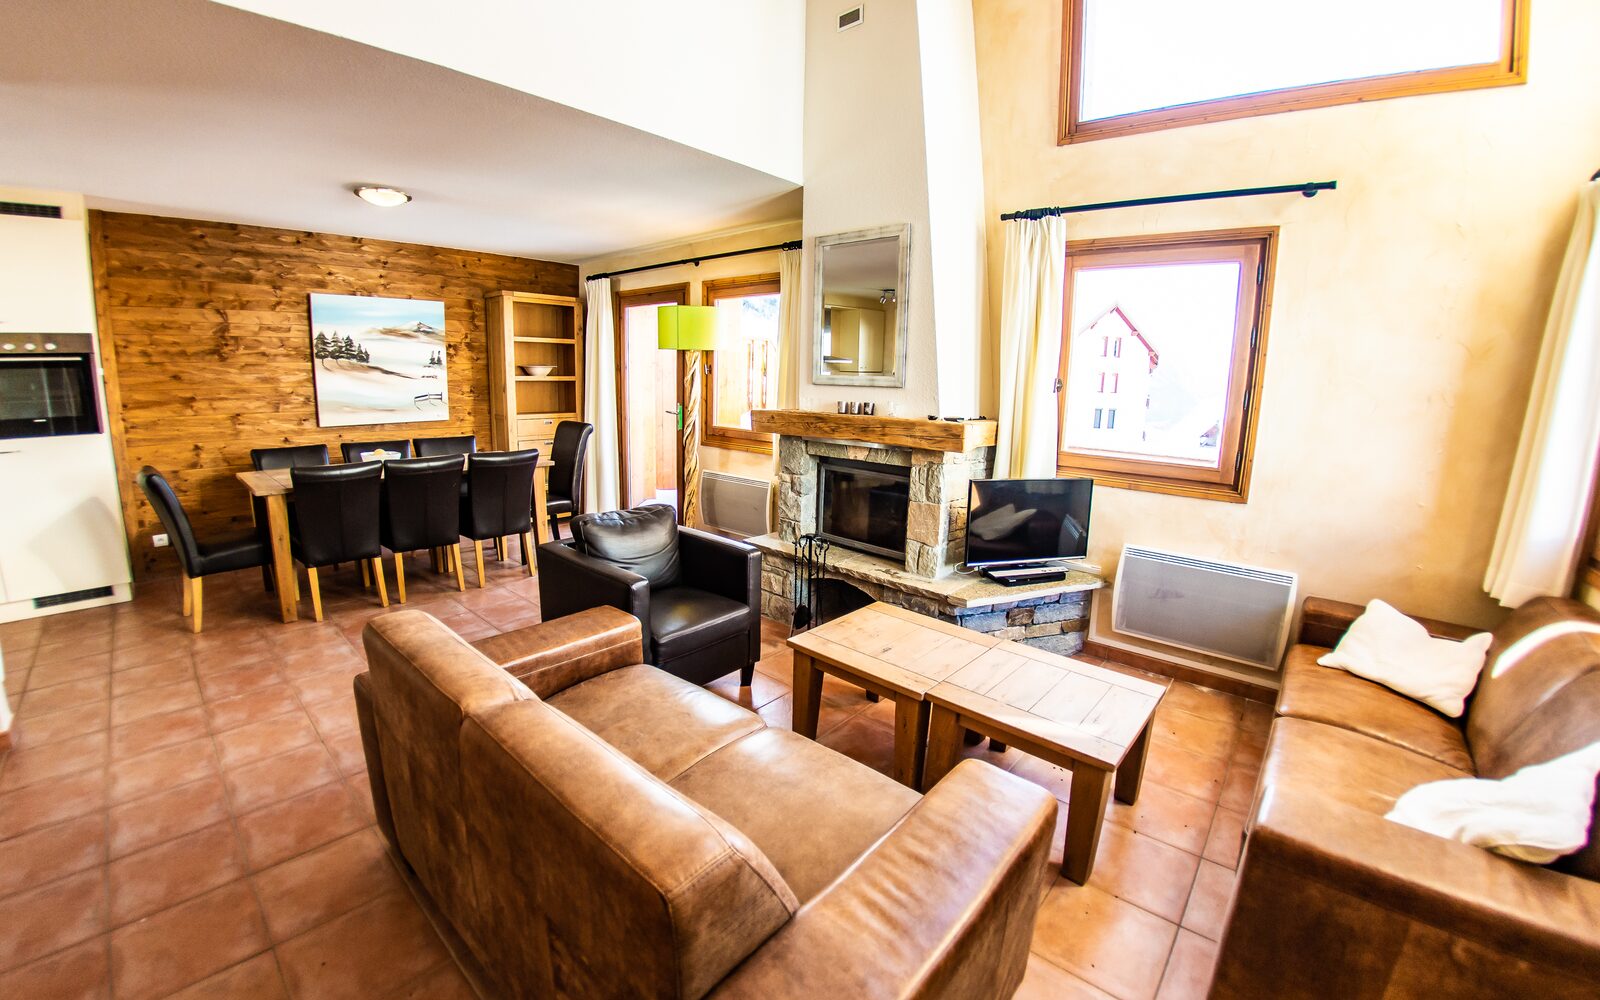 Chalet on the piste